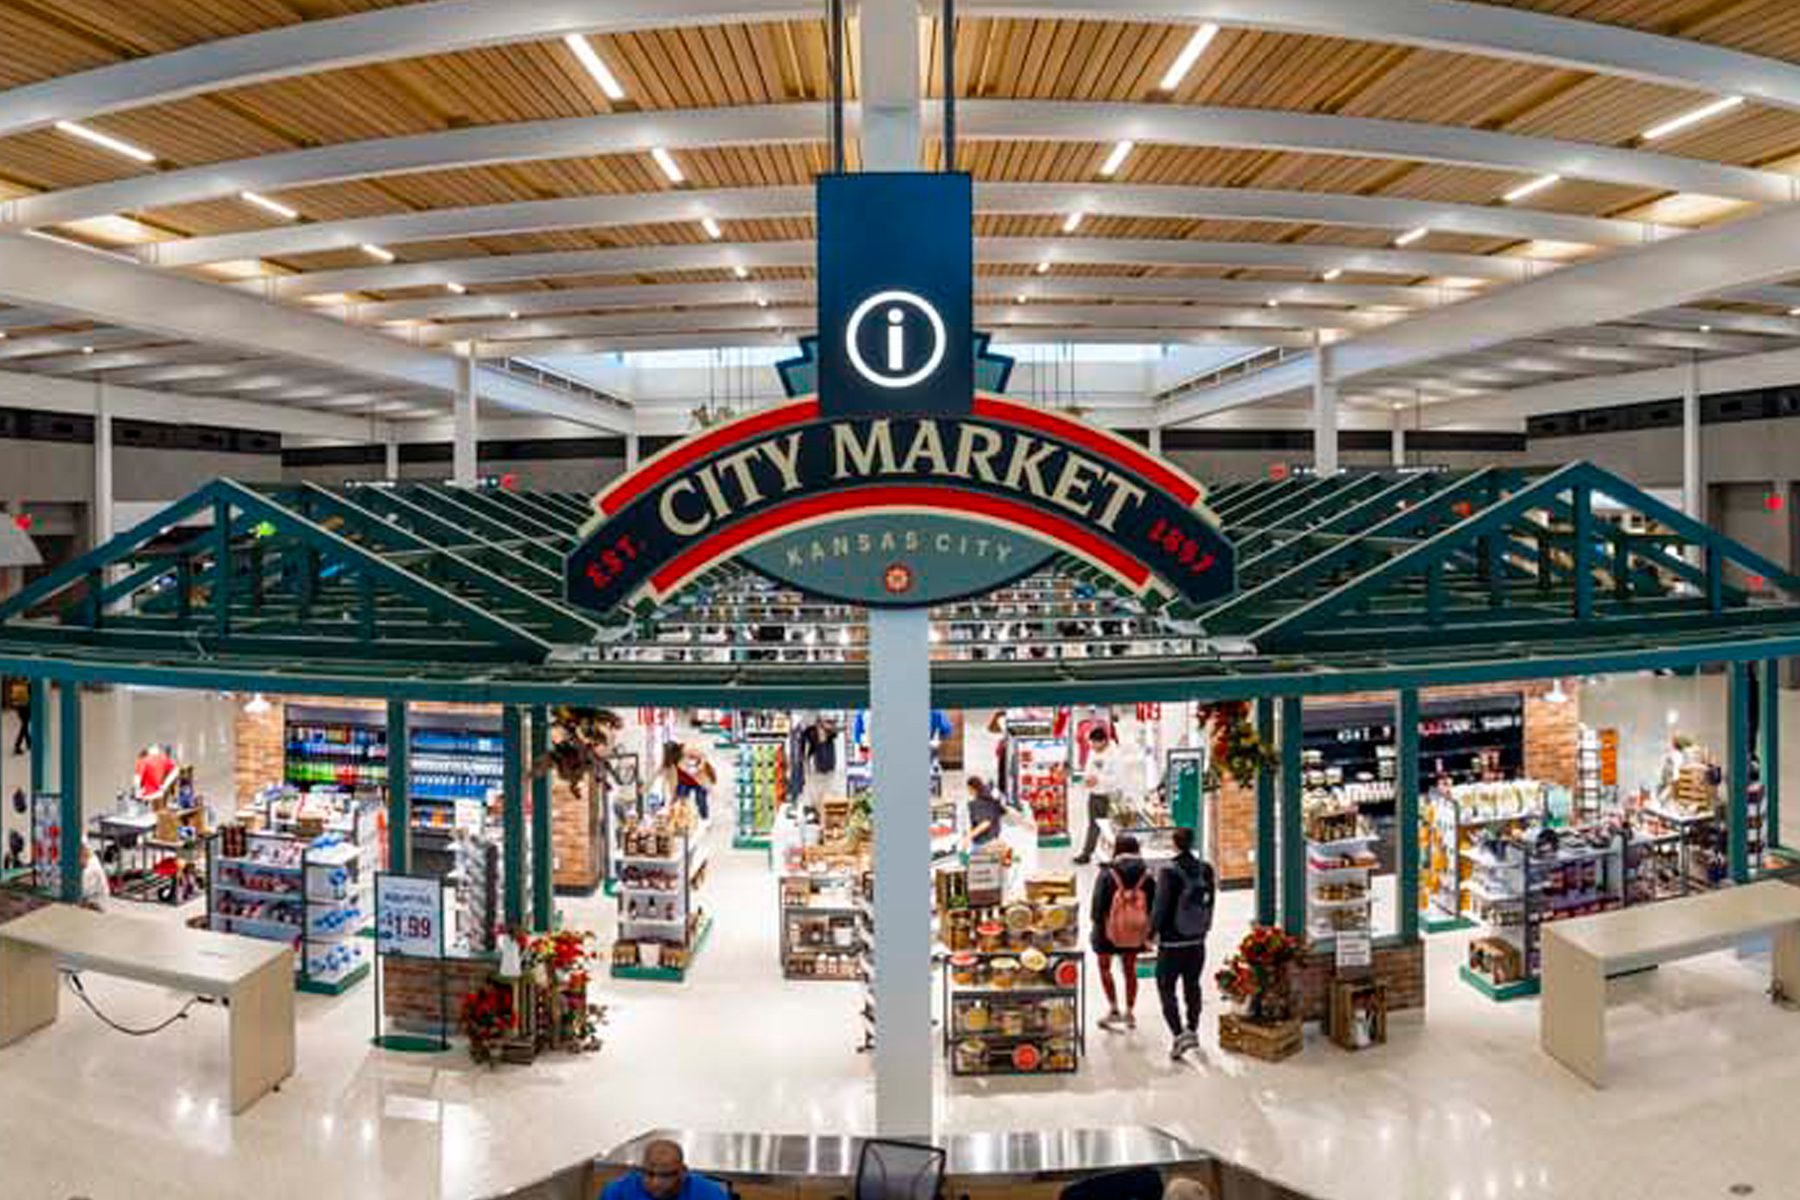 An overhead view of the City Market retail section of Kansas City Airport.